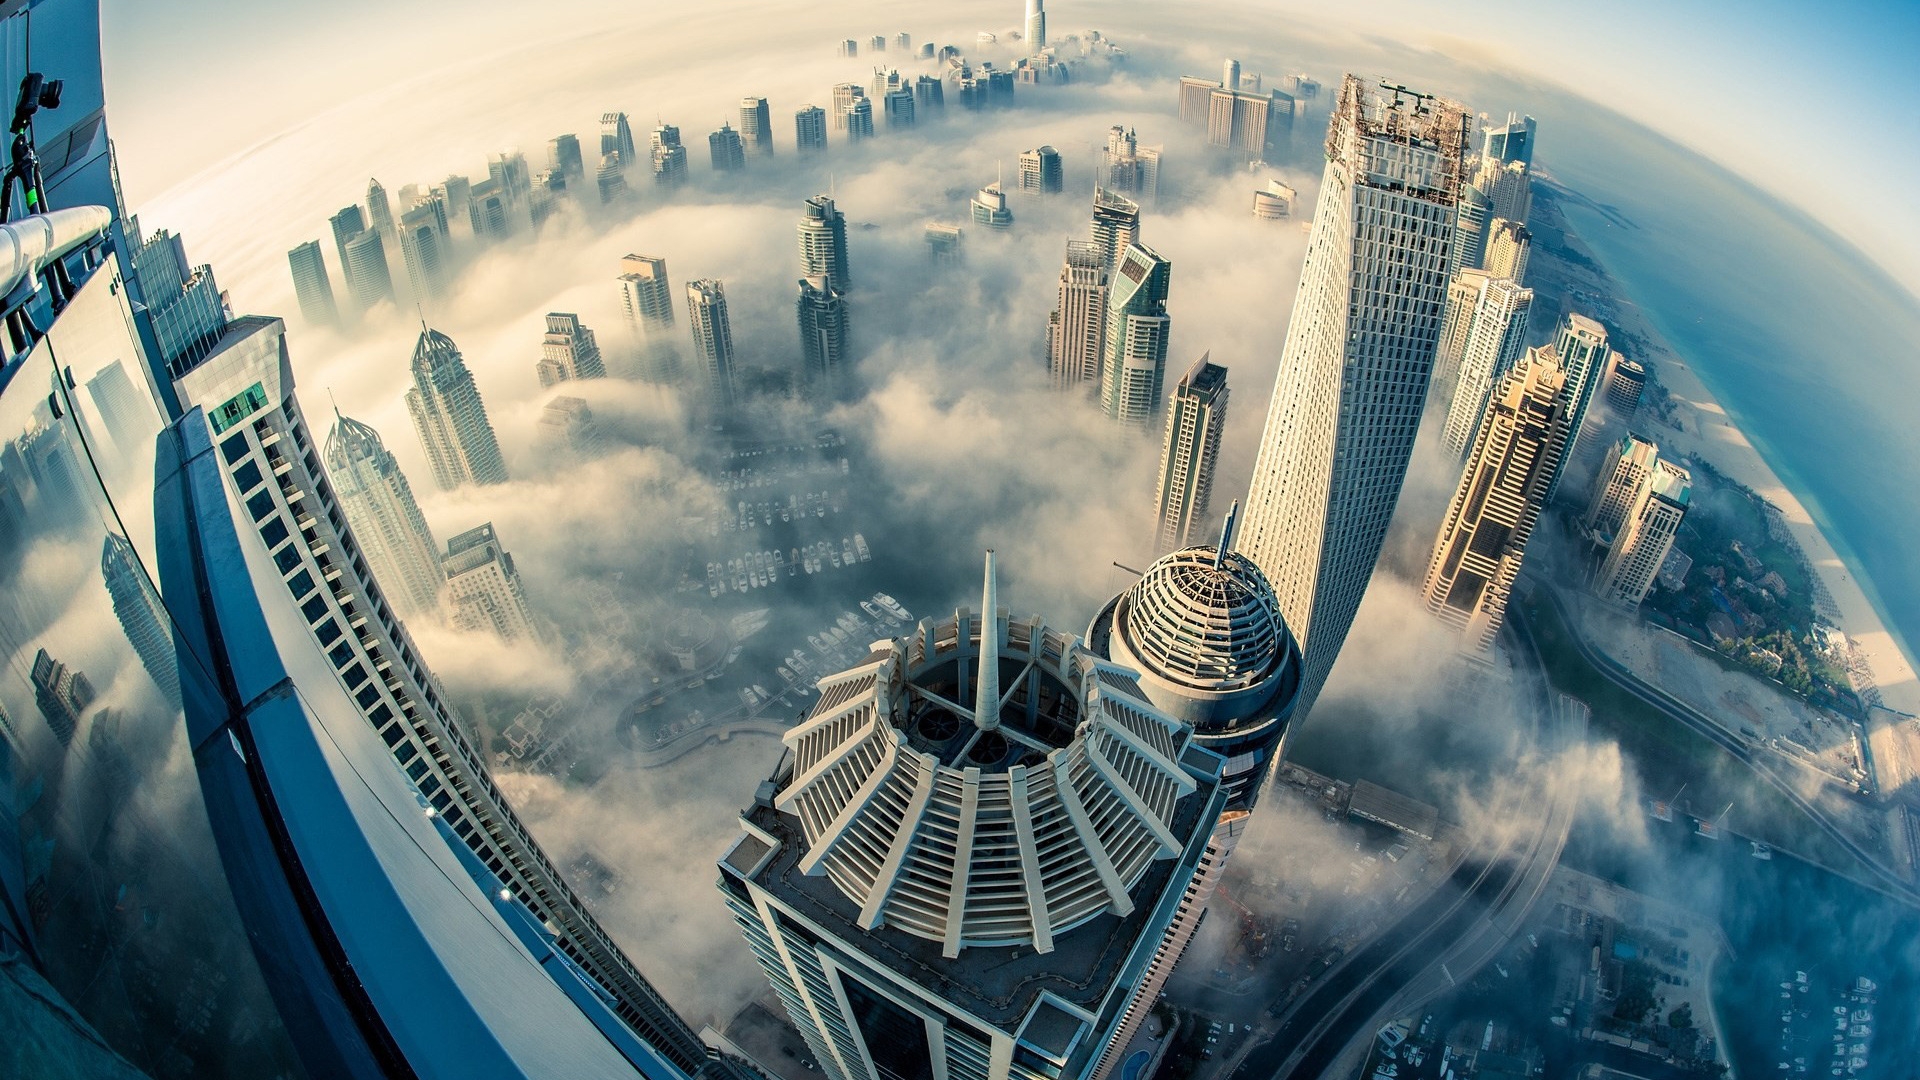 Dubai Above the Clouds for 1920 x 1080 HDTV 1080p resolution